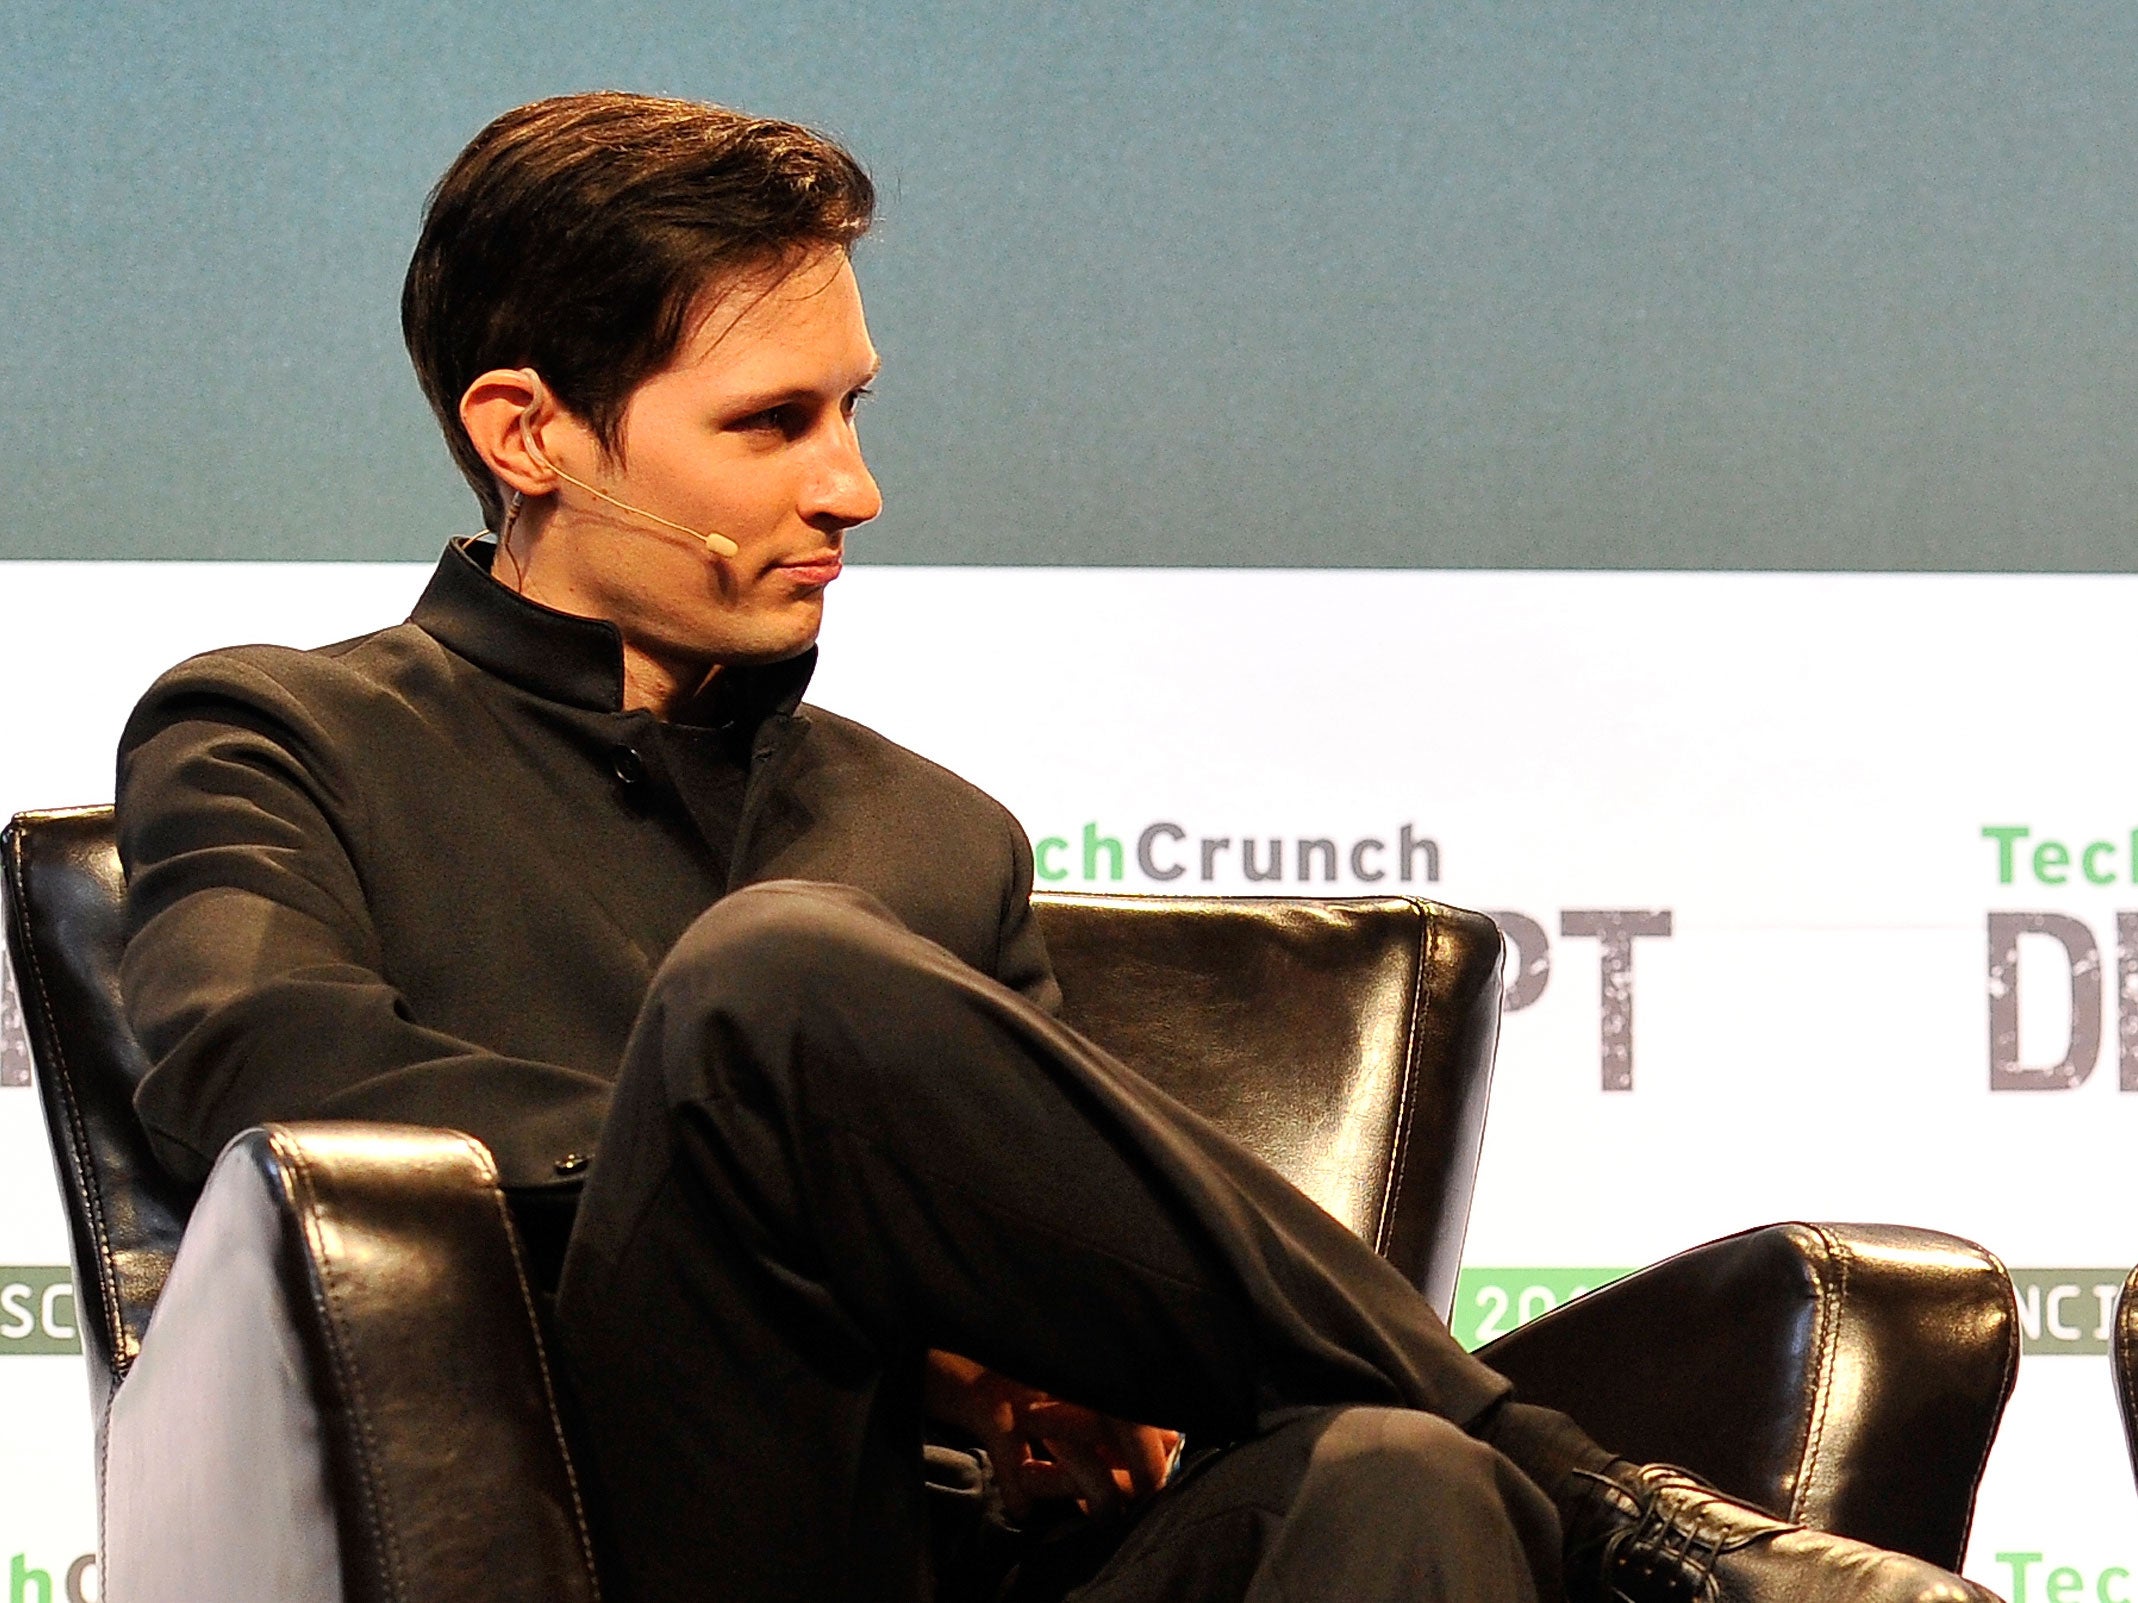 Pavel Durov during an interview with Mike Butcher at TechCrunch Disrupt in September 2015